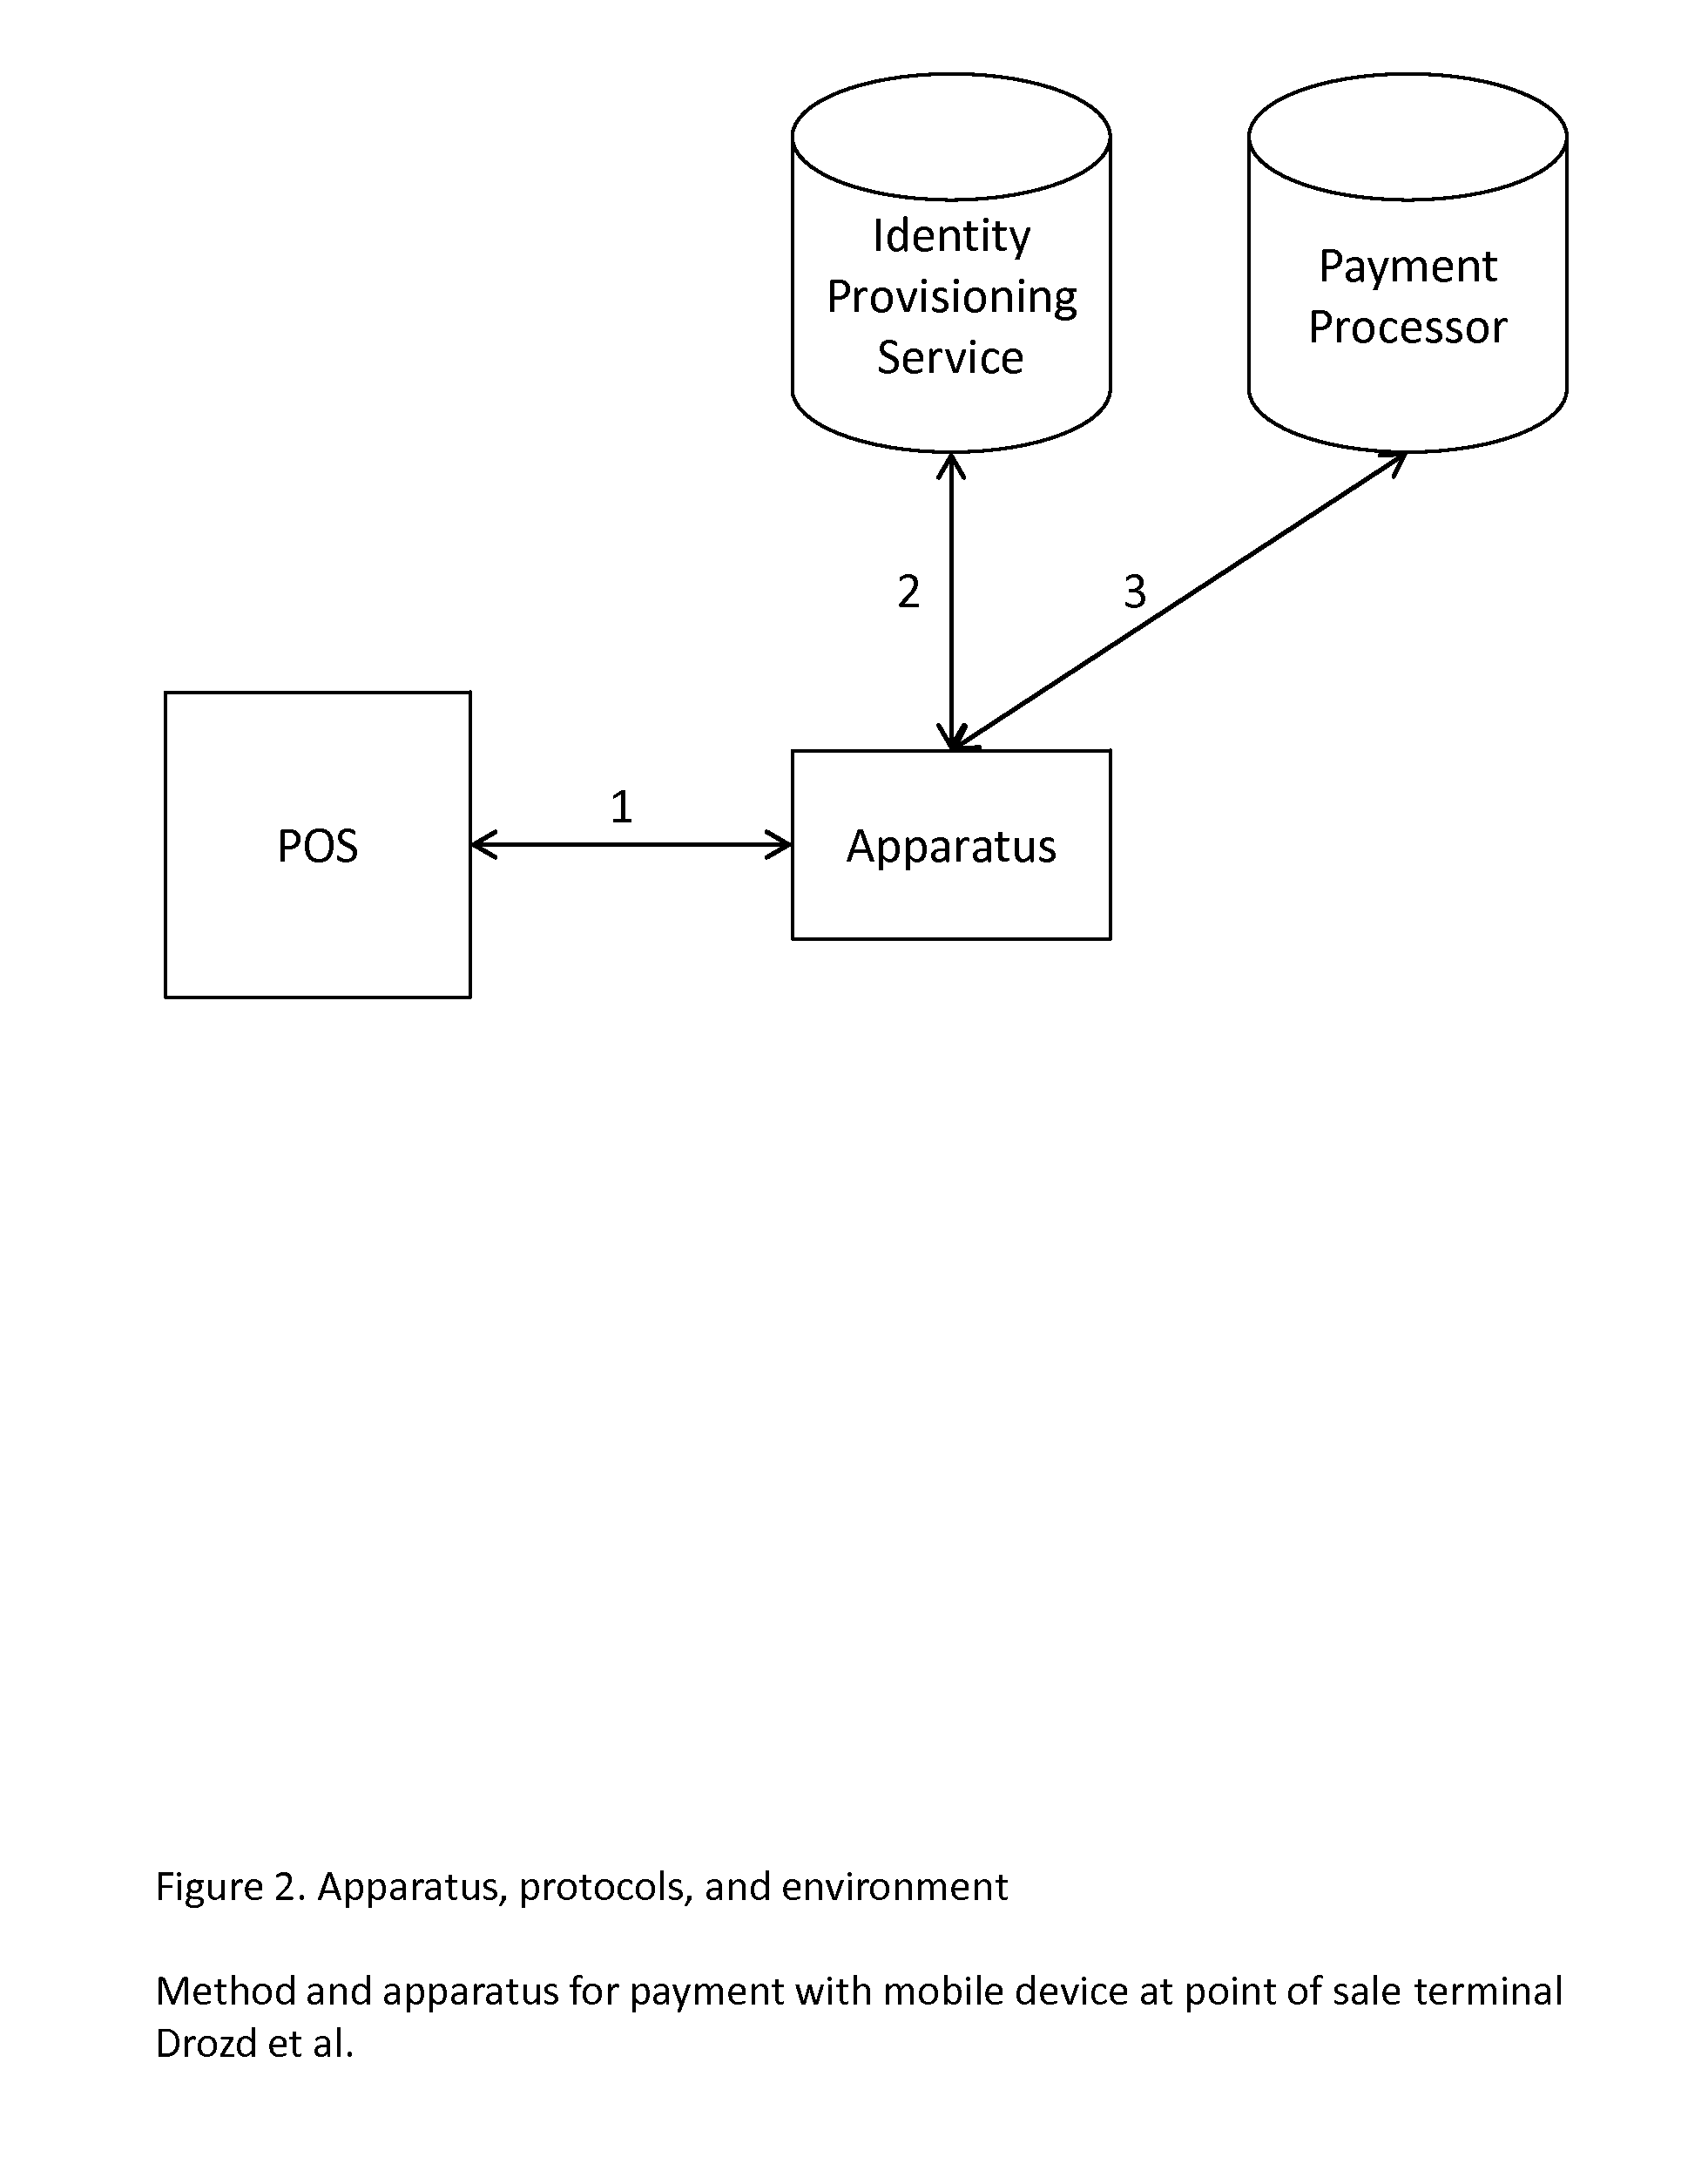 Method and apparatus for payment with mobile device at point of sale terminal